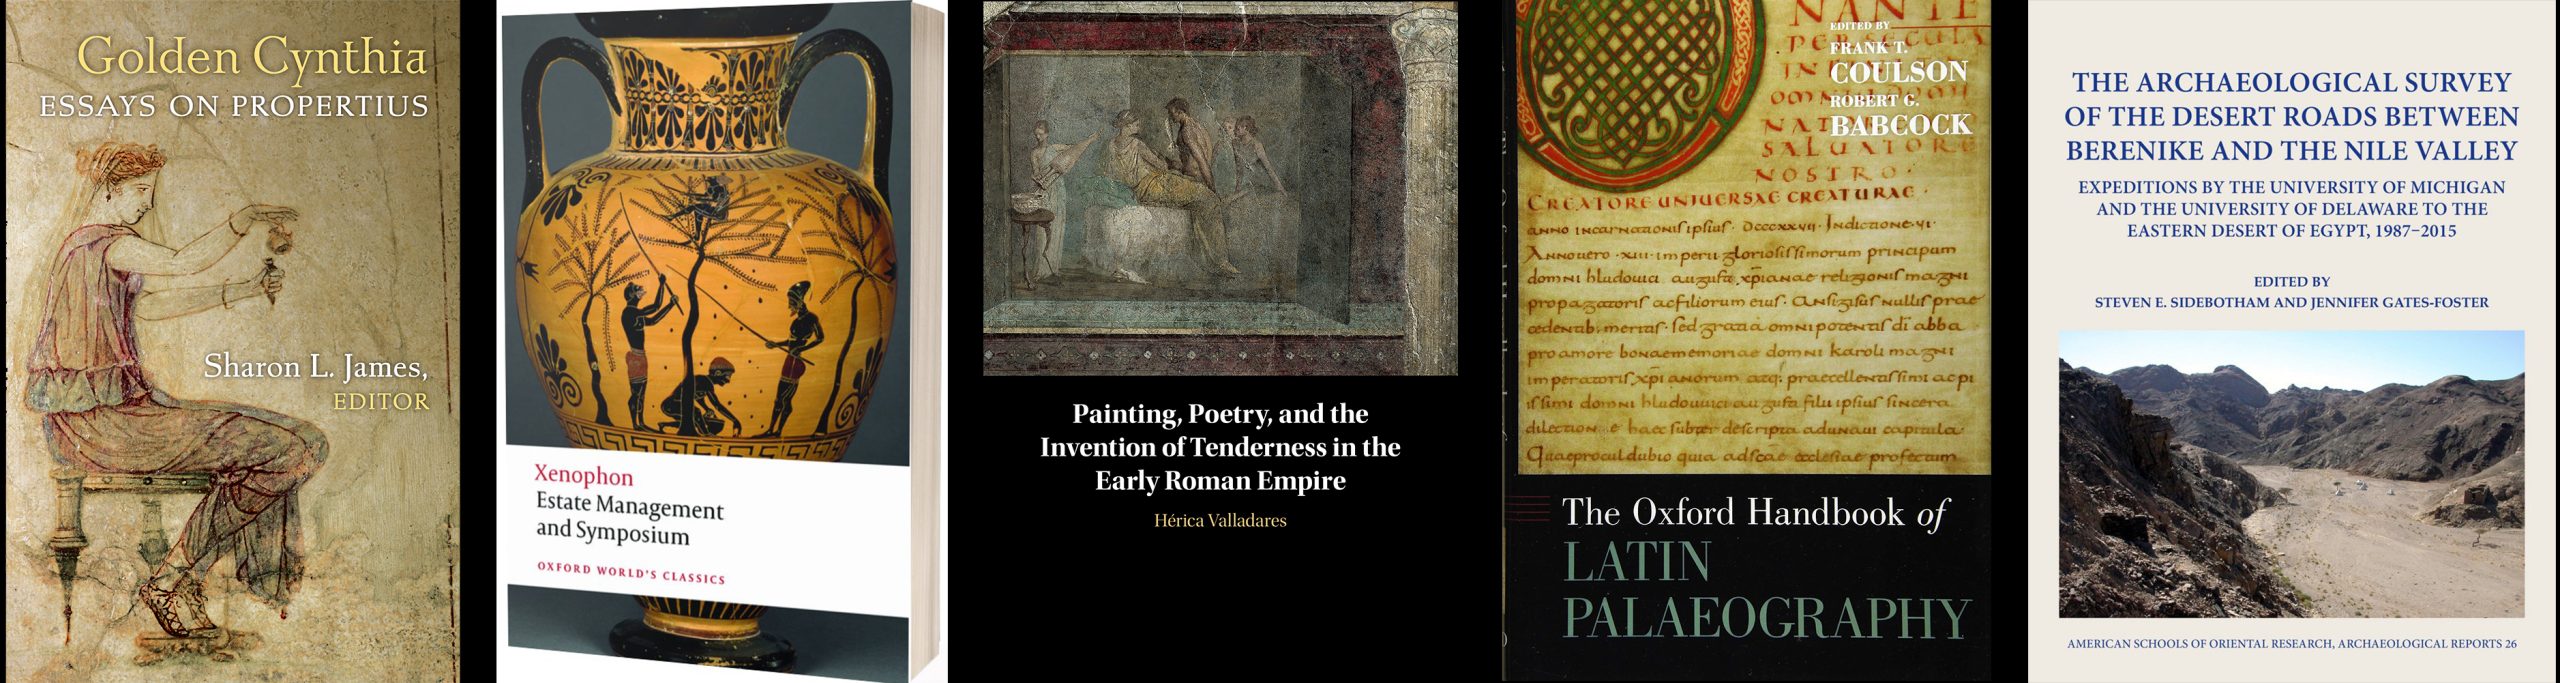 First Book: Golden Cynthia: Essays on Propertius, edited by Sharon L. James. Second Book: Xenophon: Estate Management and Symposium. Third Book: Painting, Poetry, and the Invention of Tenderness in the Early Roman Empire, Hérica Valladares. Fourth Book: The Oxford Handbook of Latin Palaeography, edited by Frank T. Coulson and Robert C. Babcock. Fifth Book: The Archaeological Survey of the Desert Roads Between Berenike and the Nile Valley, Expeditions by the University of Michigan and the University of Delaware to the Eastern Desert of Egypt, 1987-2015, edited by Steven E. Sidebottom and Jennifer Gates-Foster.